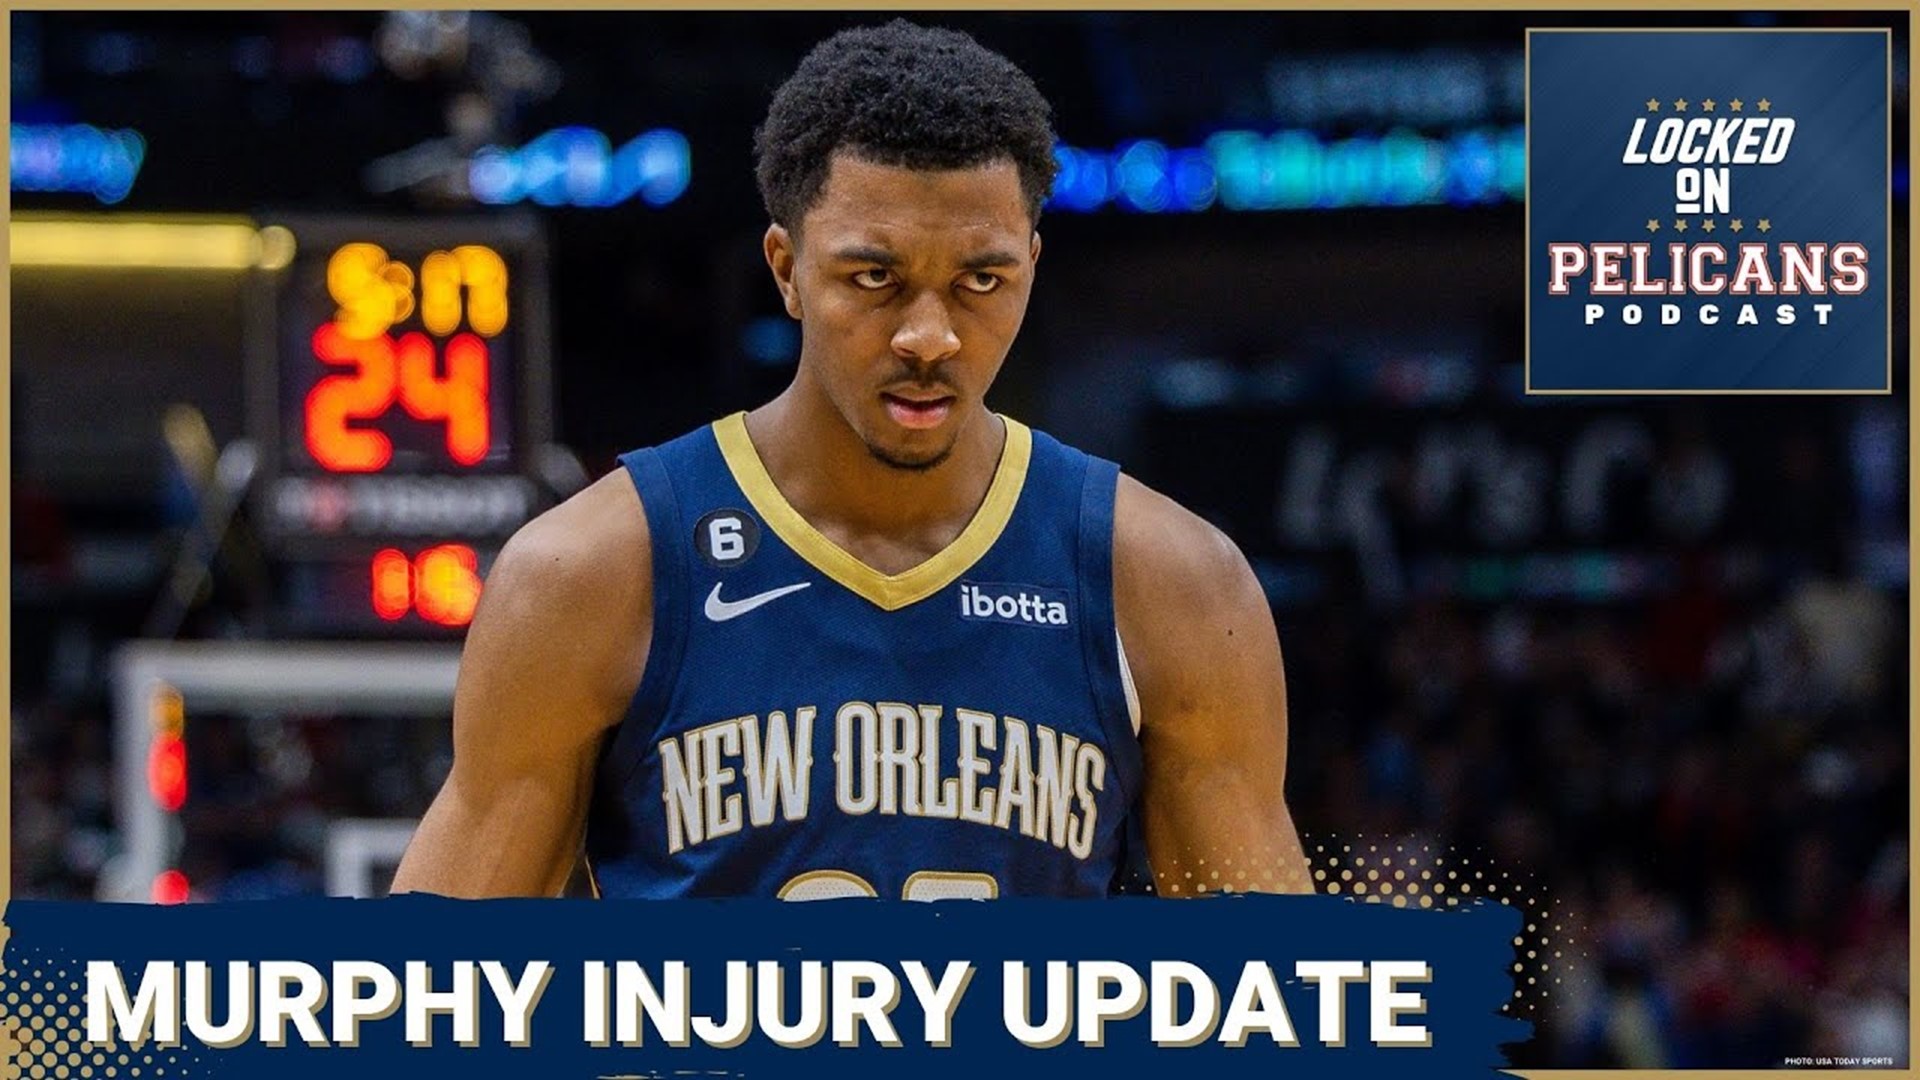 Trey Murphy III had successful surgery on his injured meniscus. Jake Madison gives you the latest injury update and when we can expect to see Trey back on the court